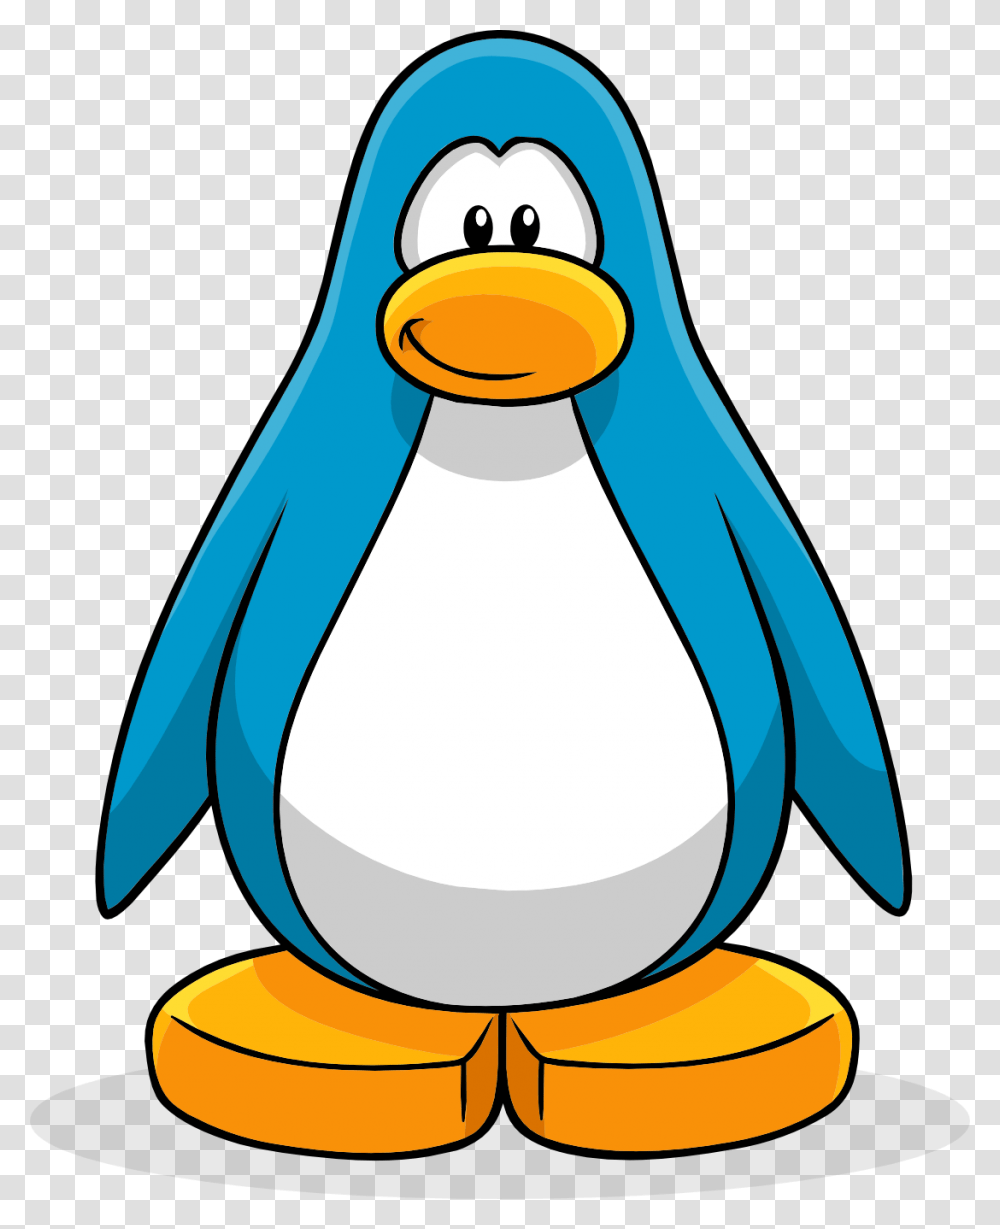 Download Penguin Free Image And Clipart Club Penguin, Bird, Animal, King Penguin Transparent Png